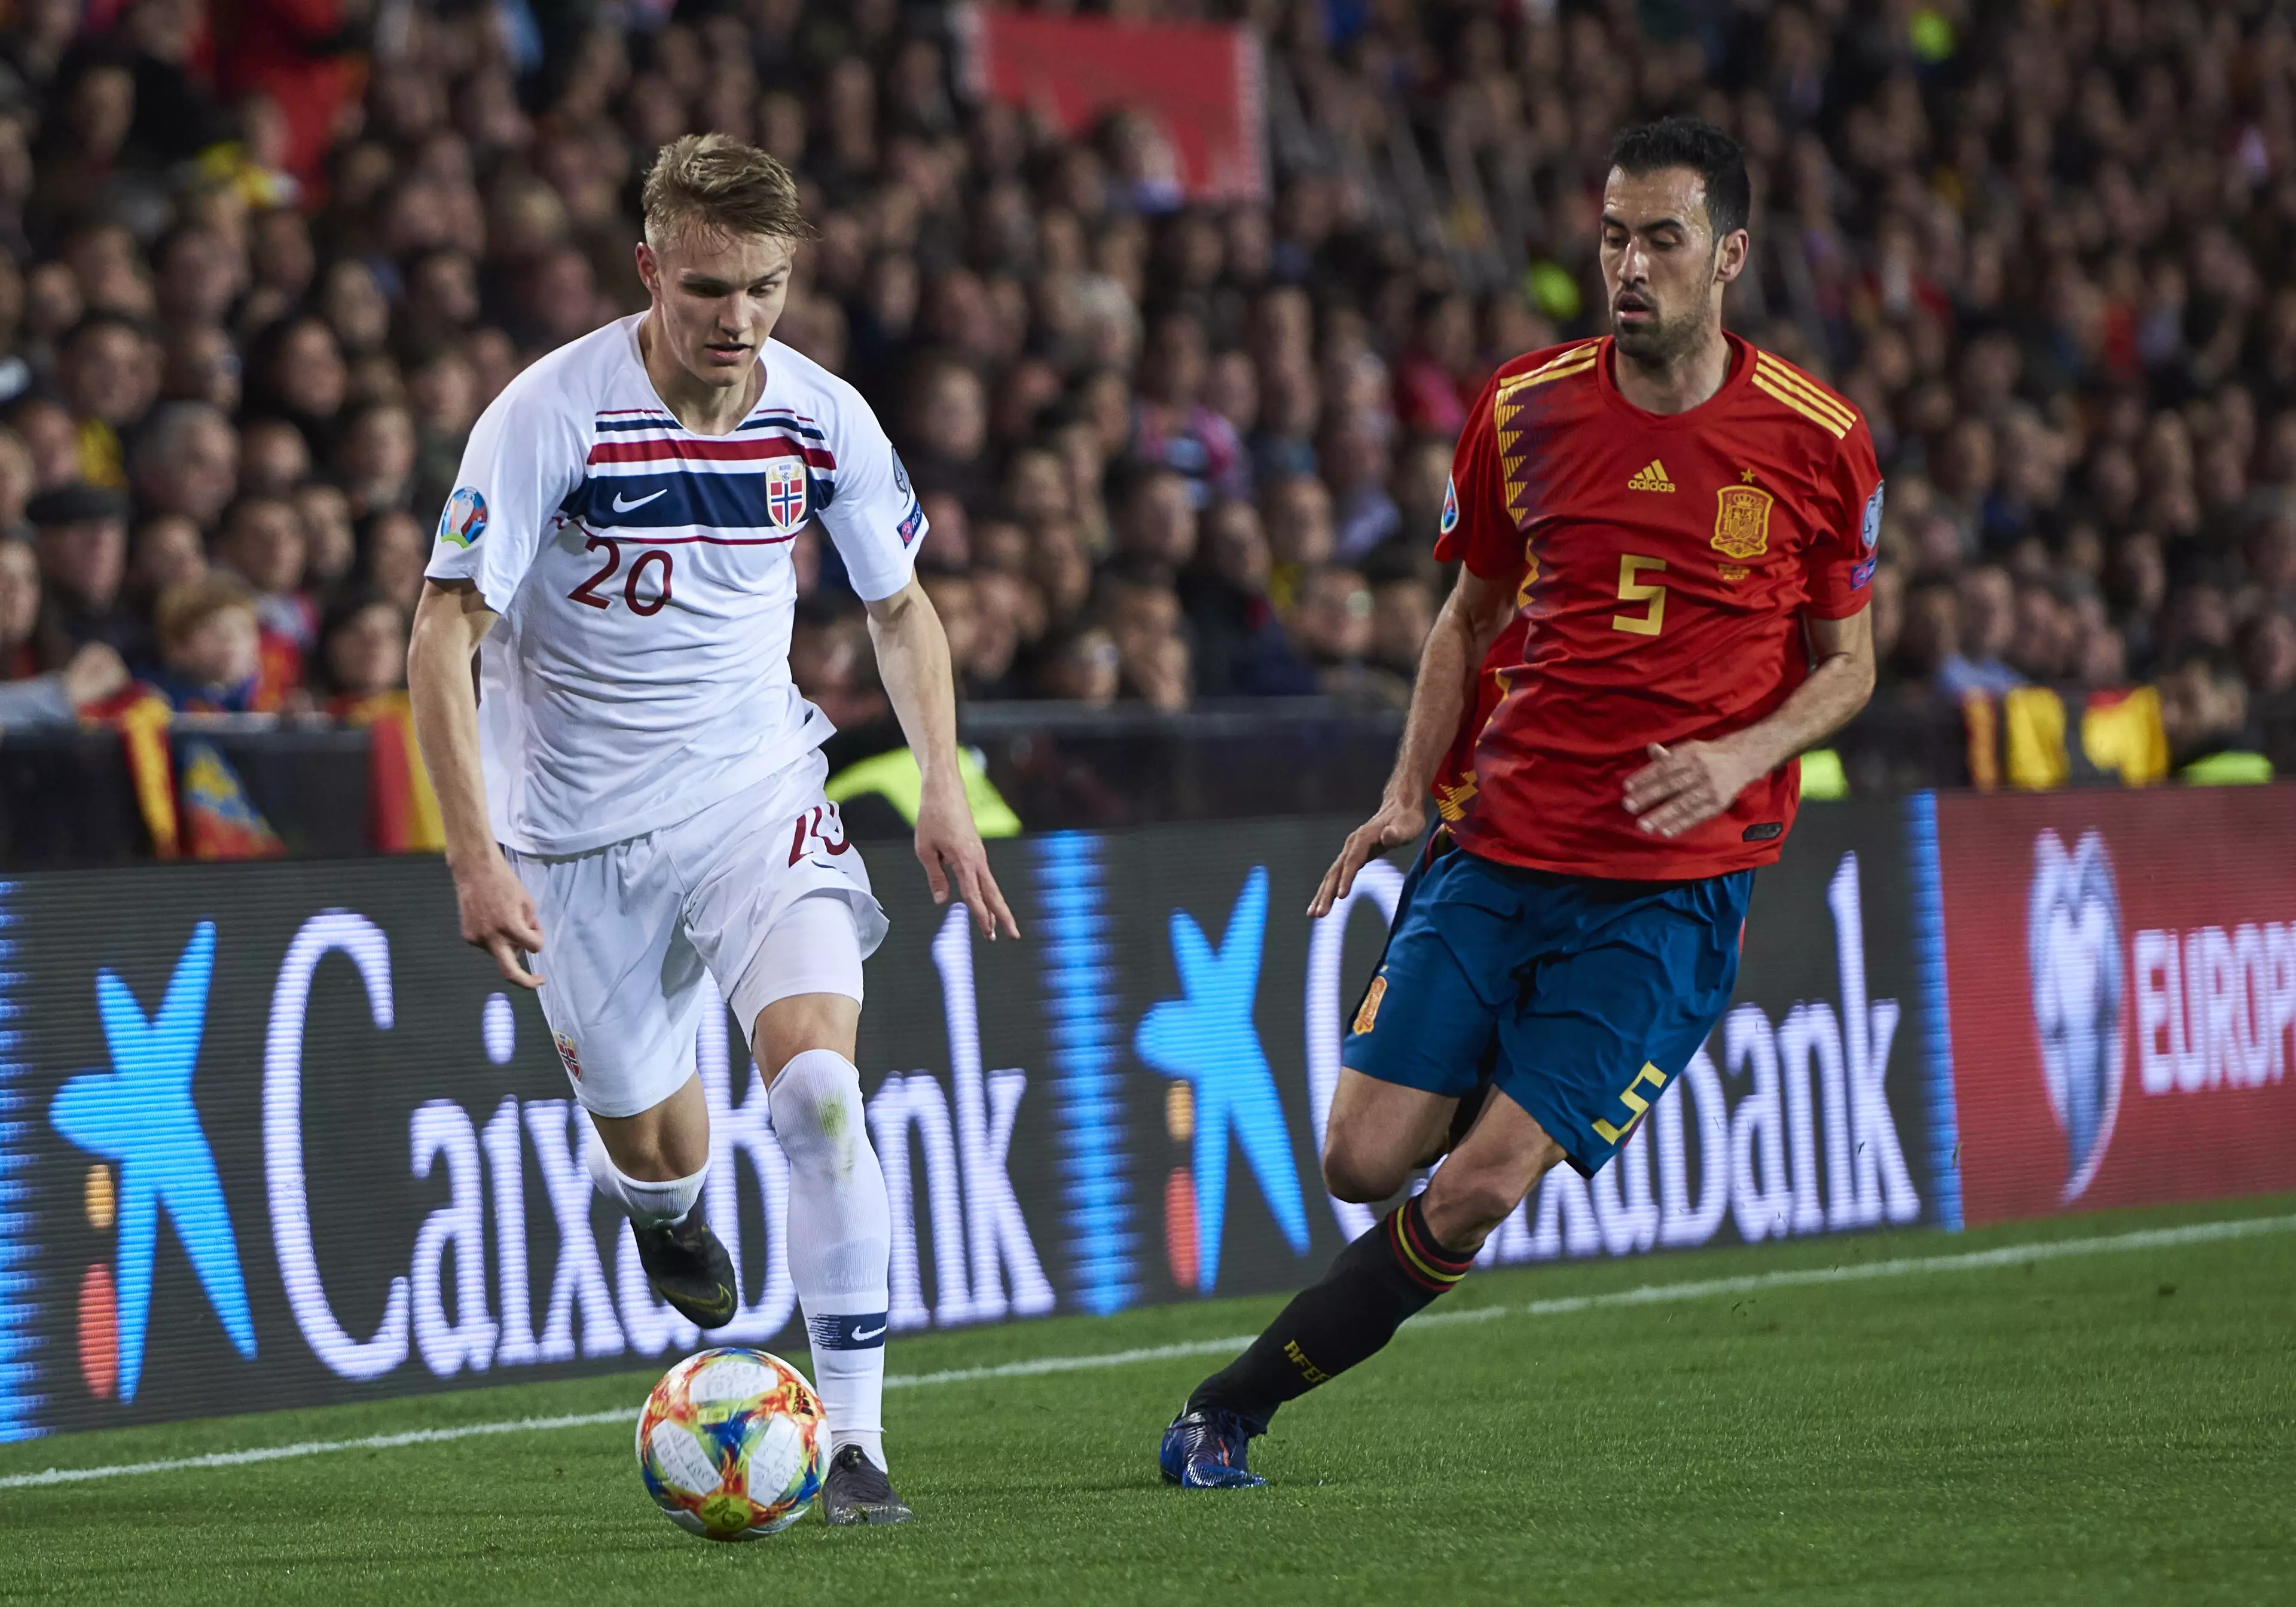 Odegaard playing for Norway against Spain in March. Image: PA Images